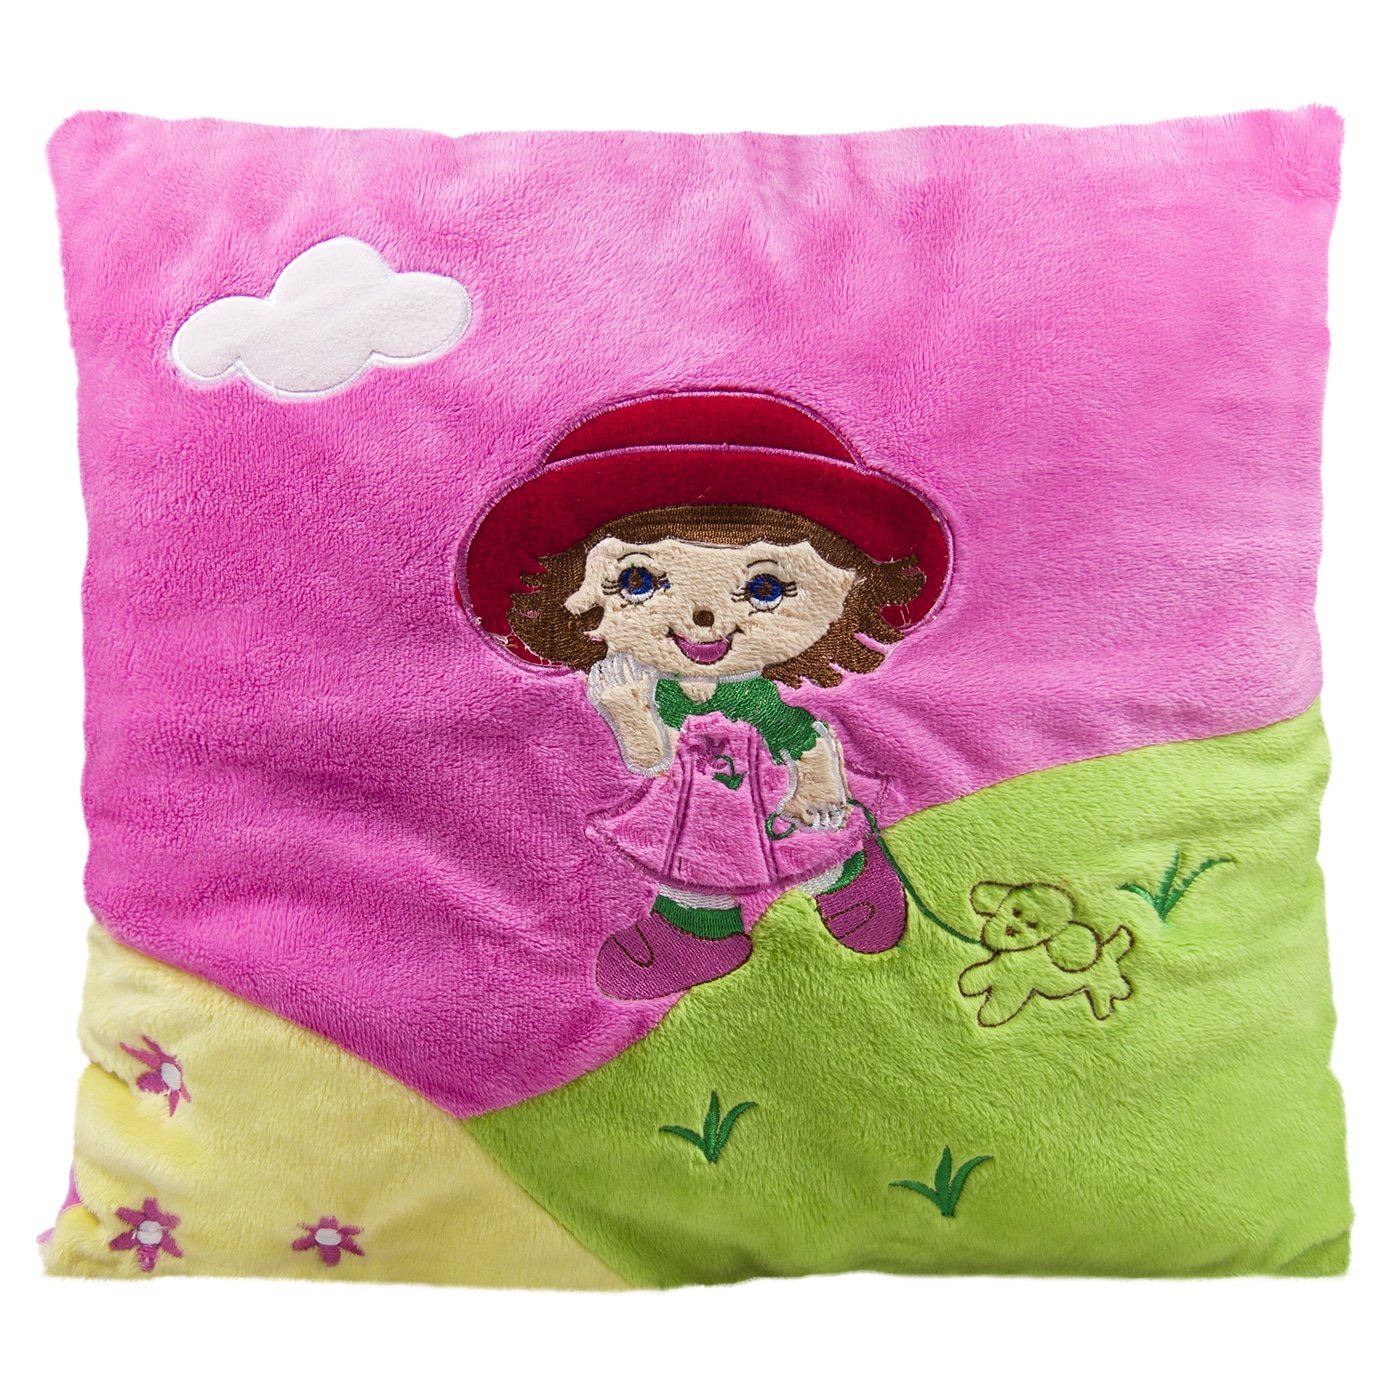 Pillow with a girl